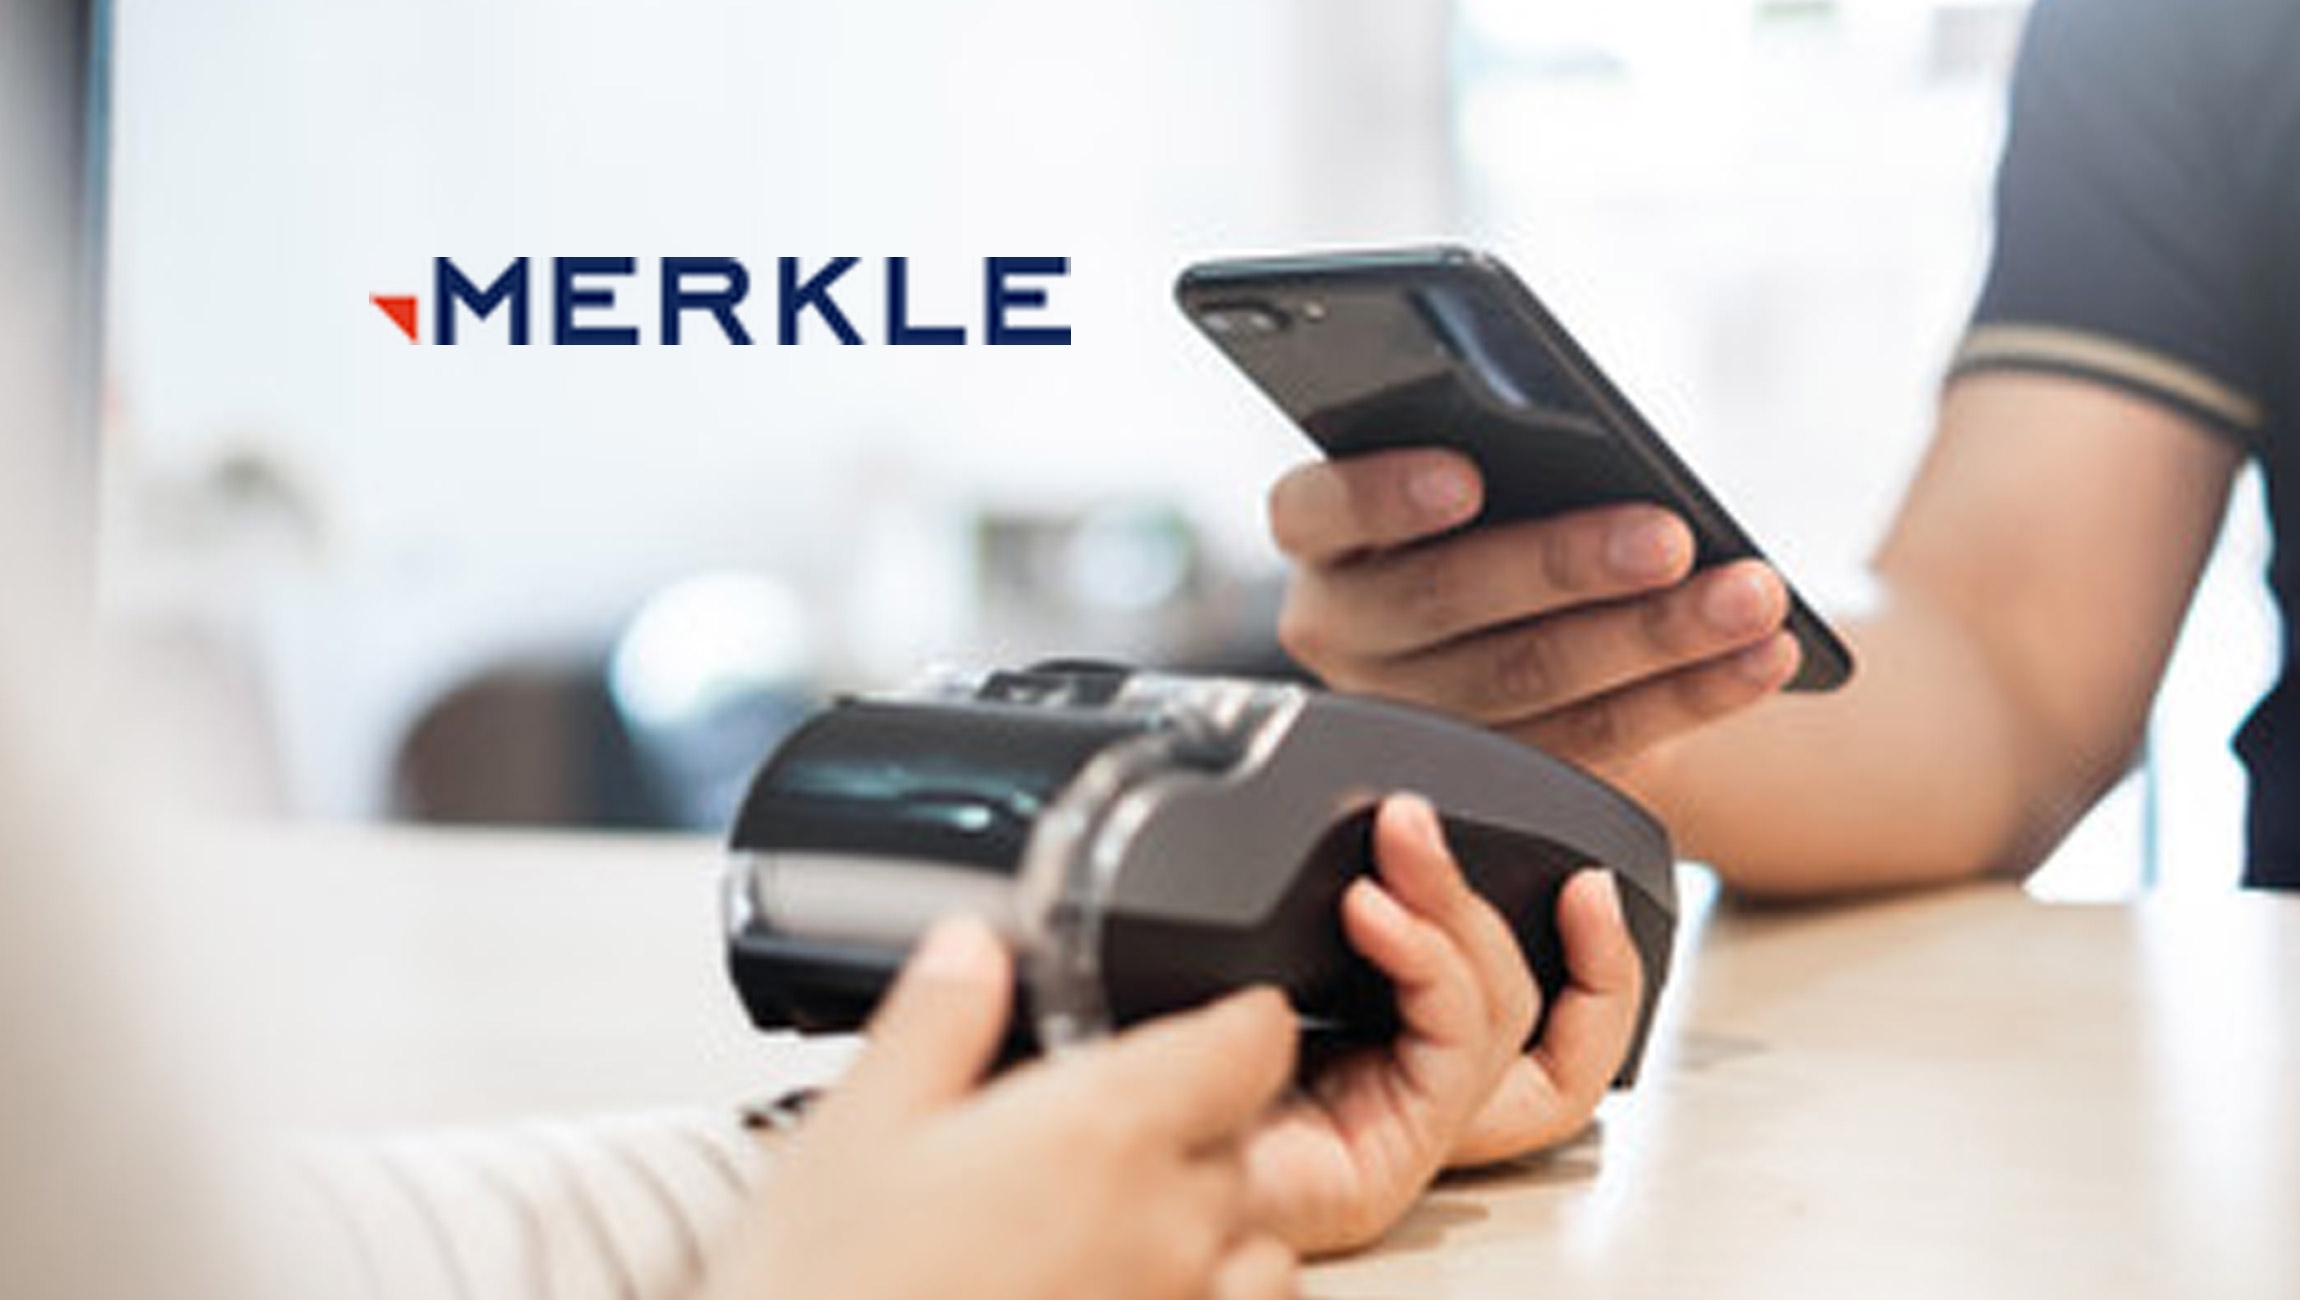 Merkle introduces new customer experience products for contactless shoppers | DeviceDaily.com